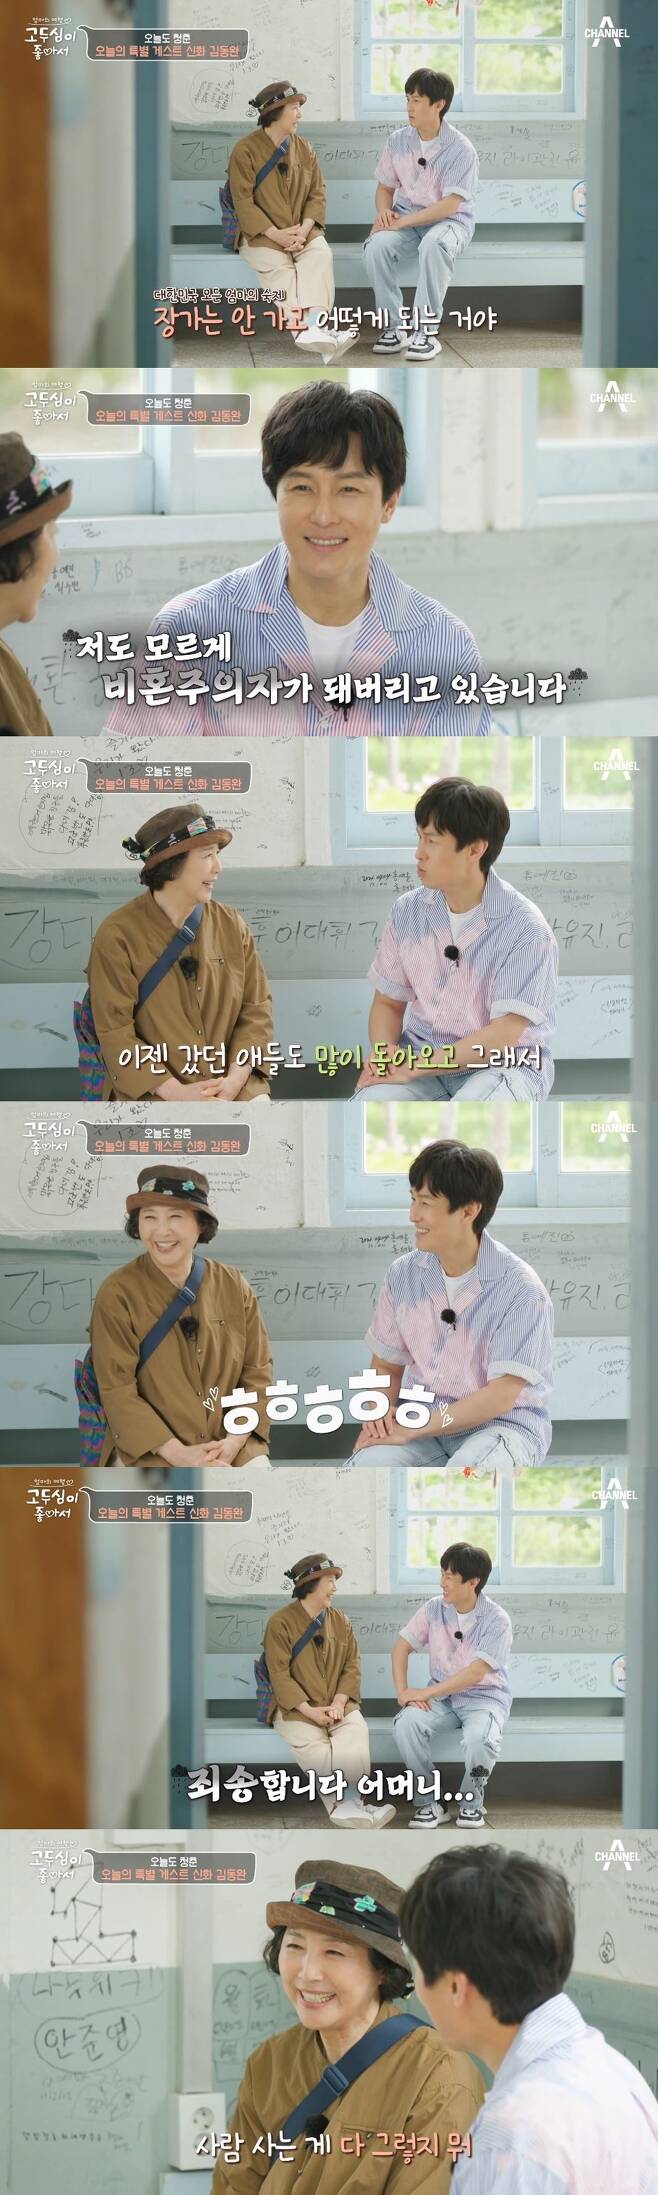 Shinhwa Kim Dong-wan talked about marriage.On June 6, Channel A  ⁇  Mothers Travel Go Doo-shim was drawn as a guest who liked Kim Dong-wan as a guest.Go Doo-shim and Kim Dong-wan met at Kim Yu-jung station in Gangwon Province.I am worried that I did not go to the market. He laughed.Go Doo-shim asked Kim Dong-wan, What happens when you dont go to Jangga Co. Youre trying to go or youre not going?Kim Dong-wan replied frankly, I have been trying a few times to get married, and I have become a non-marriage without knowing it.He said, Now the children who have gone have come back a lot.Kim Dong-wan said, Im sorry. I havent seen you in a long time, but Im giving you this weird news. Go Doo-shim laughed, saying, Thats what people do.On the other hand, Go Doo-shim is good is a story about our mothers who lose their I because they devote themselves to their families. It is a travel story that will meet the romance of mothers who need freedom and healing more than anyone else.